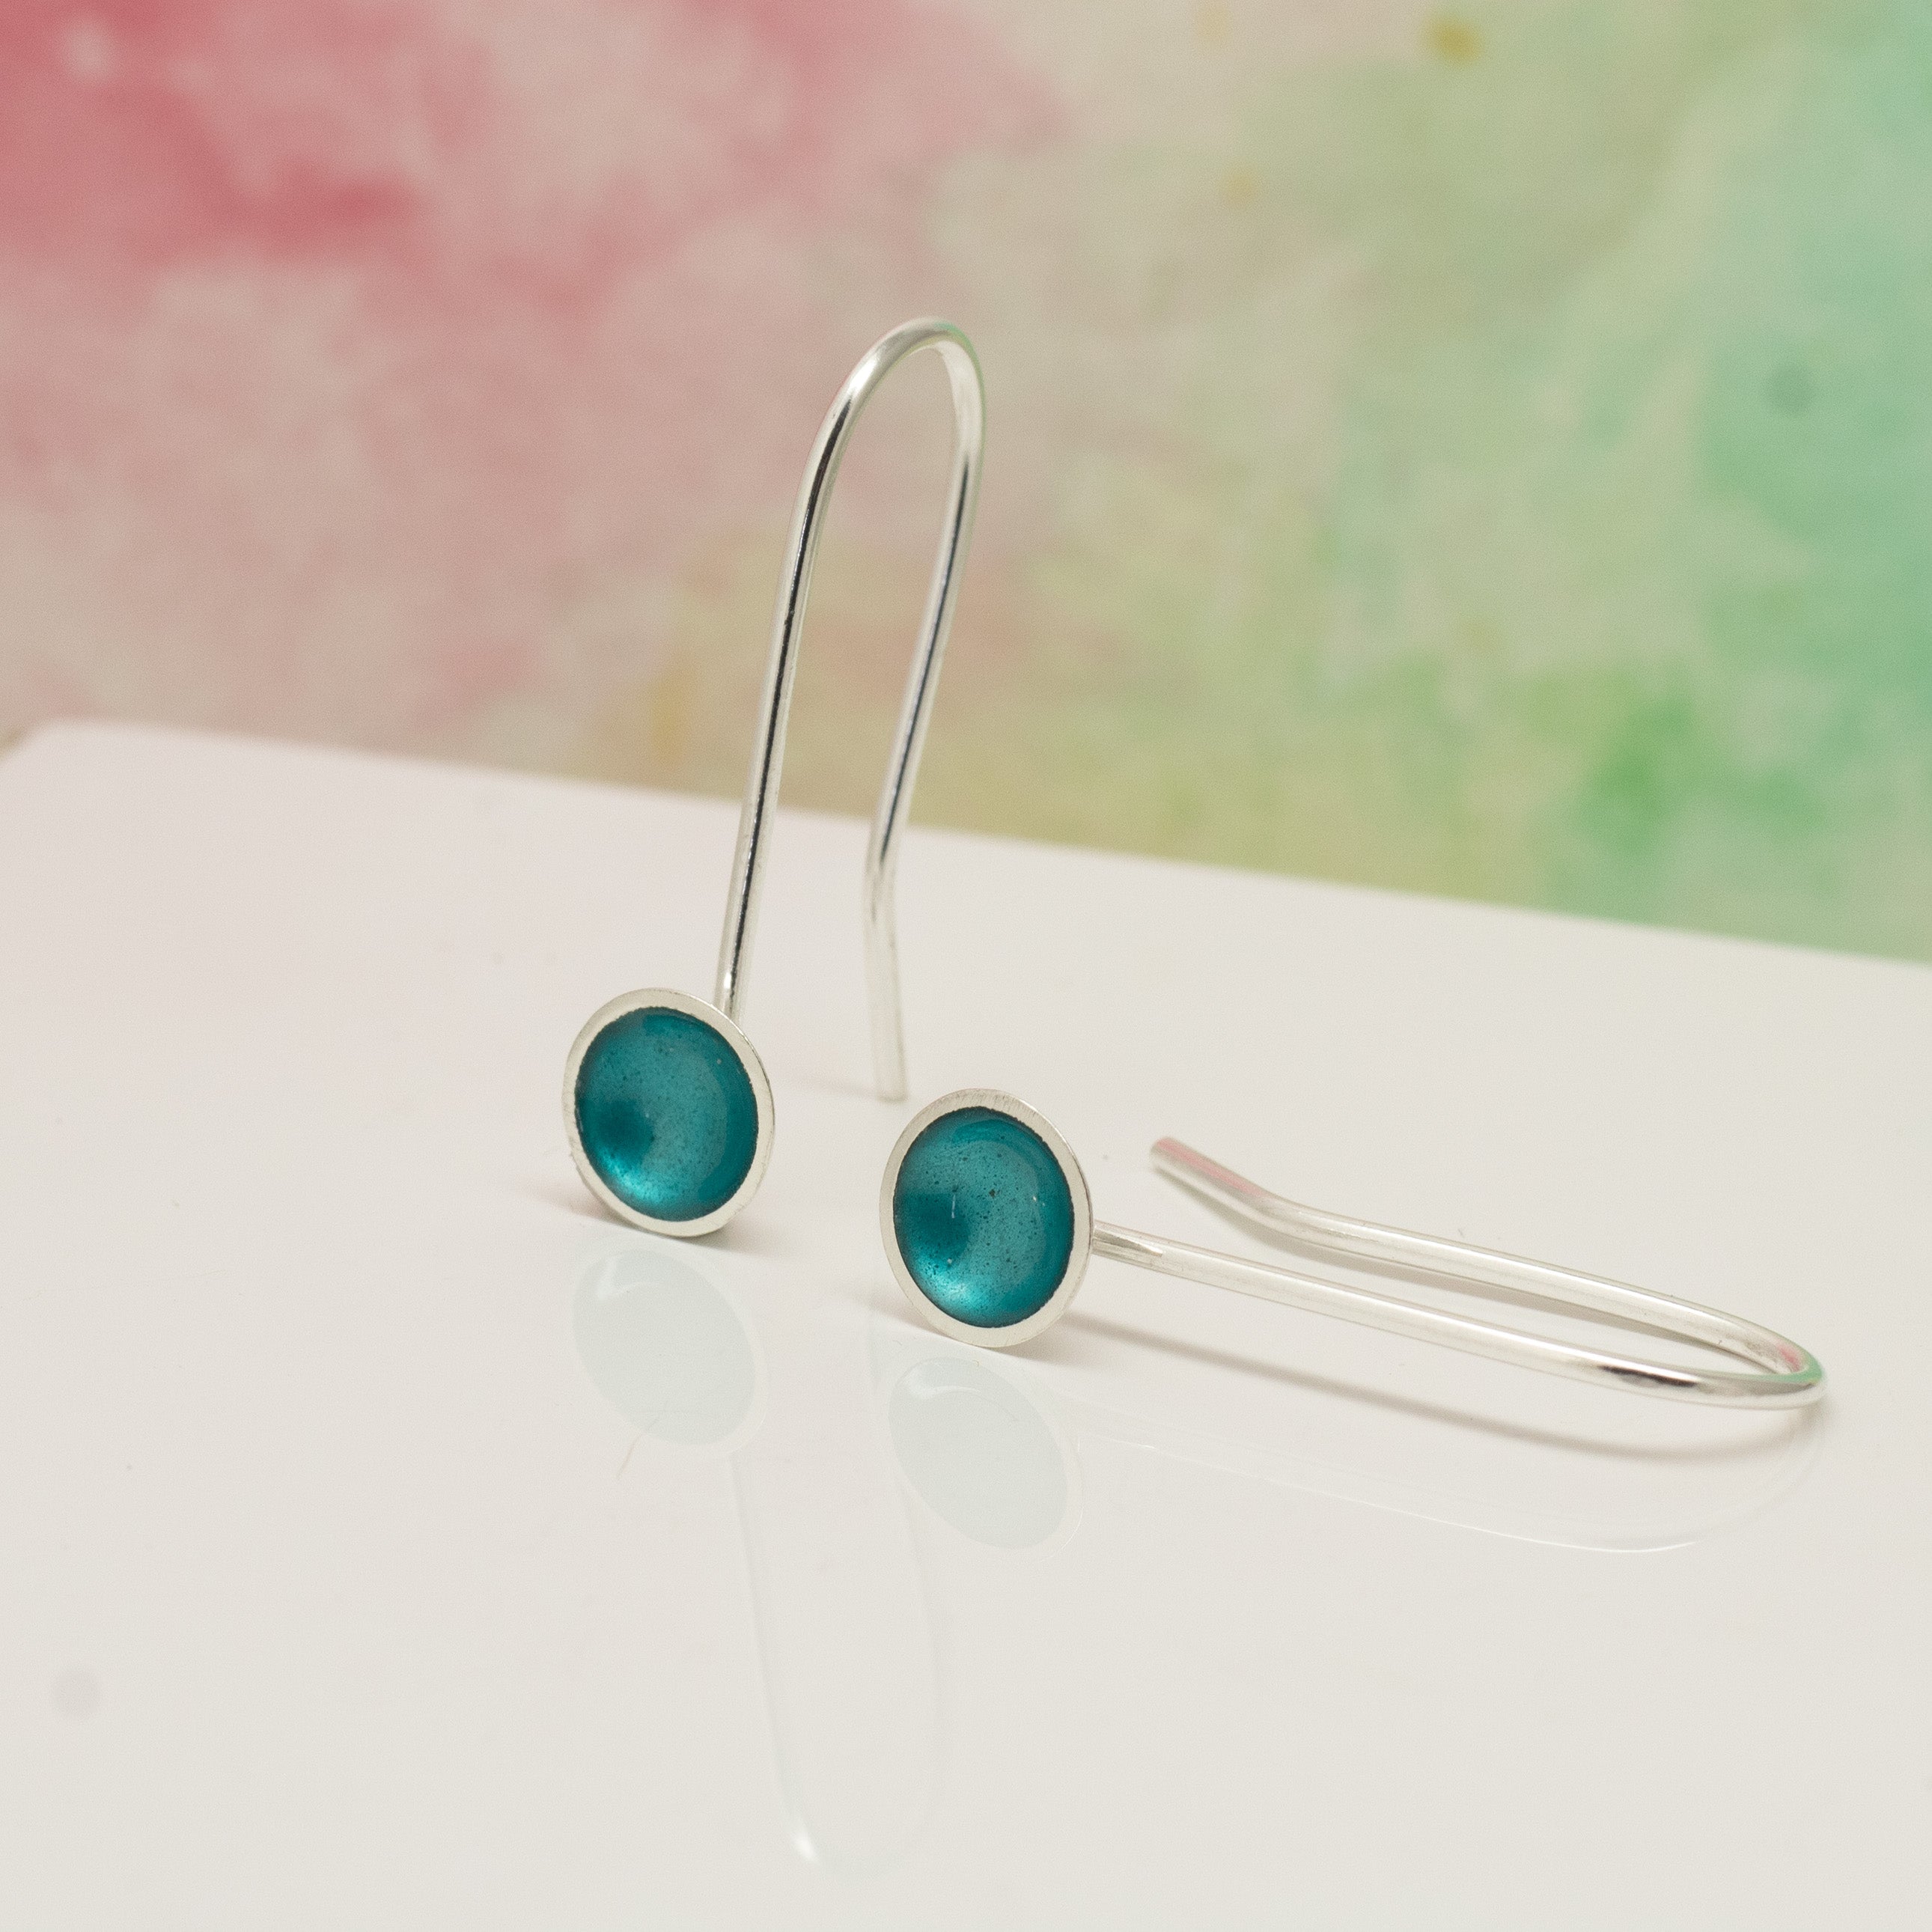 I have a few pairs of earrings from Kokkino and I absolutely love them!